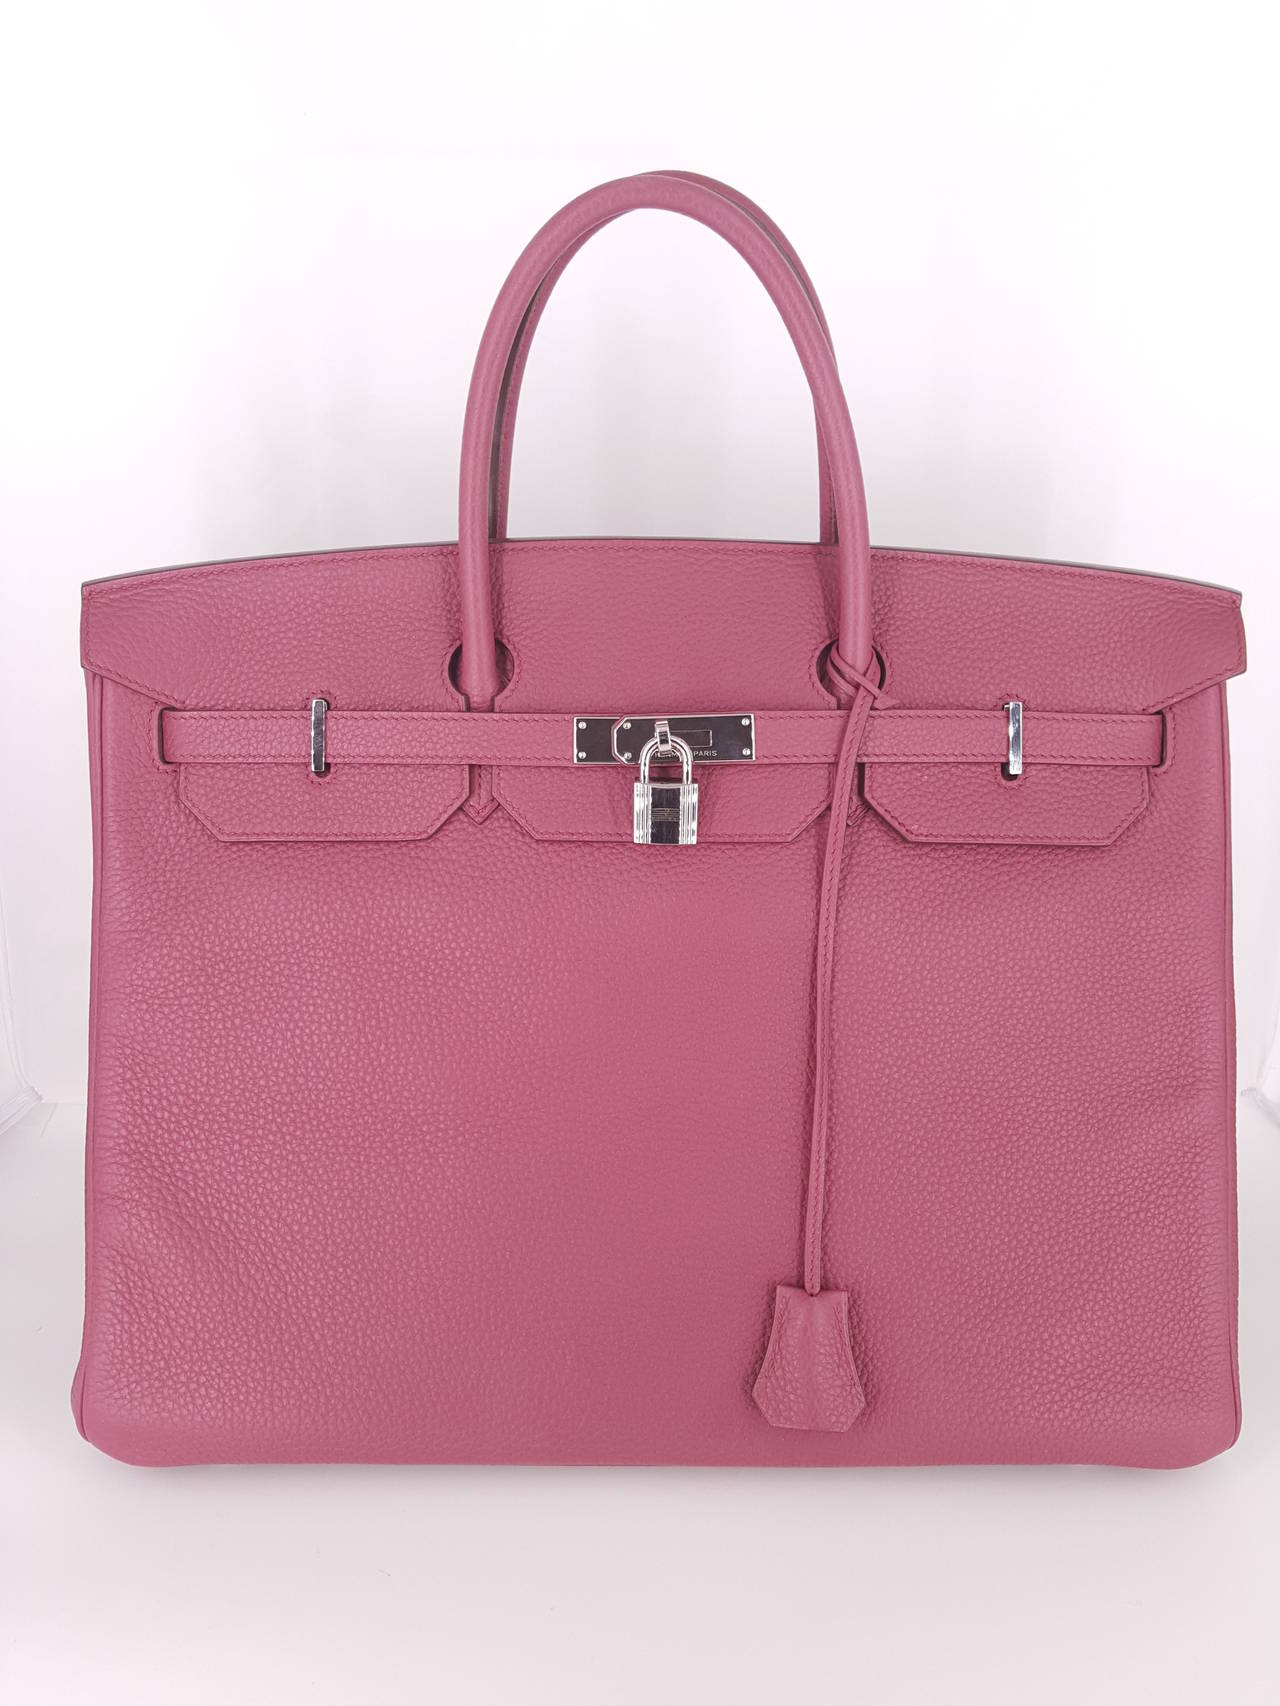 This Authentic Hermes 40 Cm Birkin is in Pristine Condition.  Hermes bags are sought after worldwide and difficult to obtain.  The subtle Rose color is exceptional in Clemence leather and Palladium hardware.  This bag was purchased in early 2012